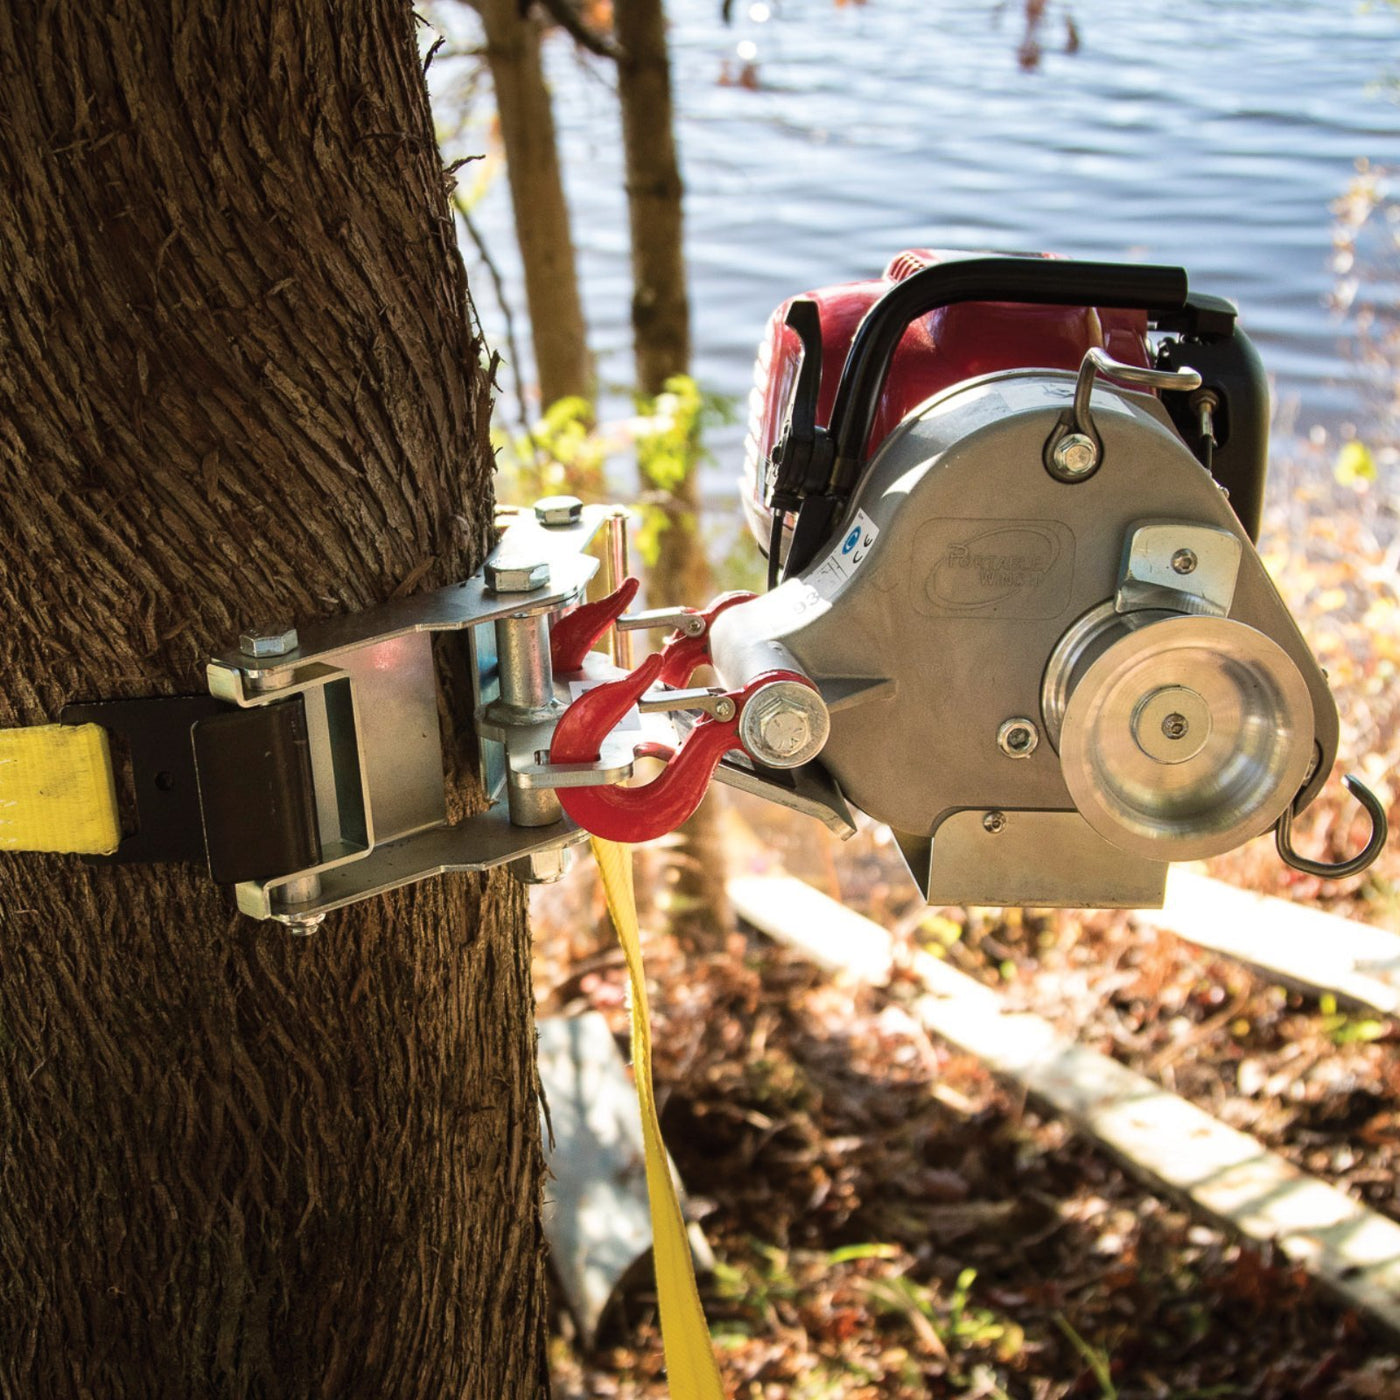 Tree-mount winch anchoring system